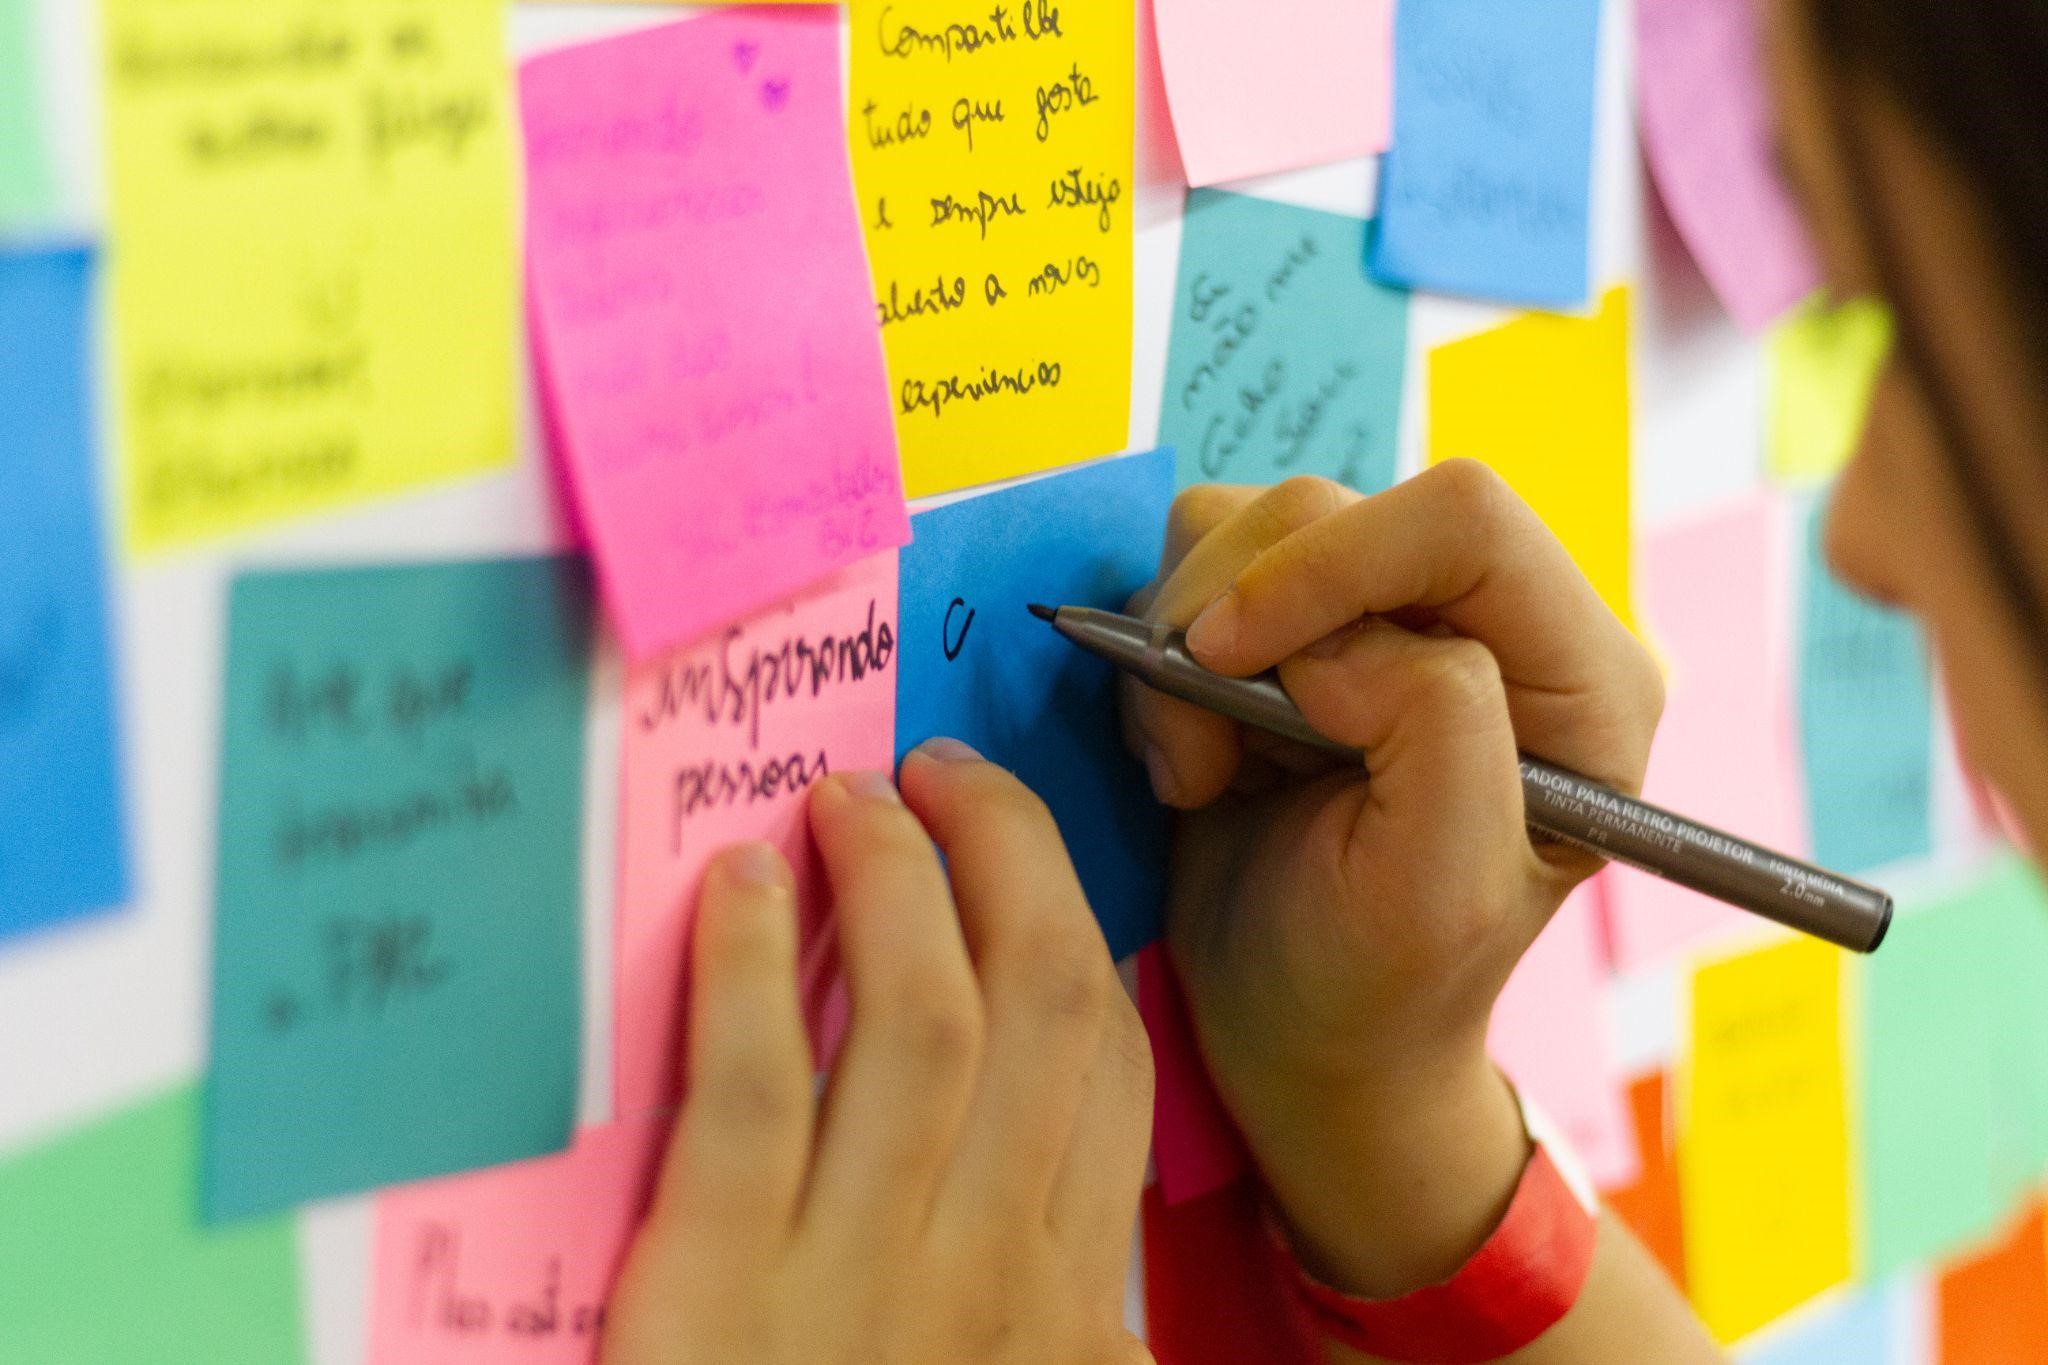 An author forming guest blogging ideas for authors and arranging thoughts on vibrant sticky notes.